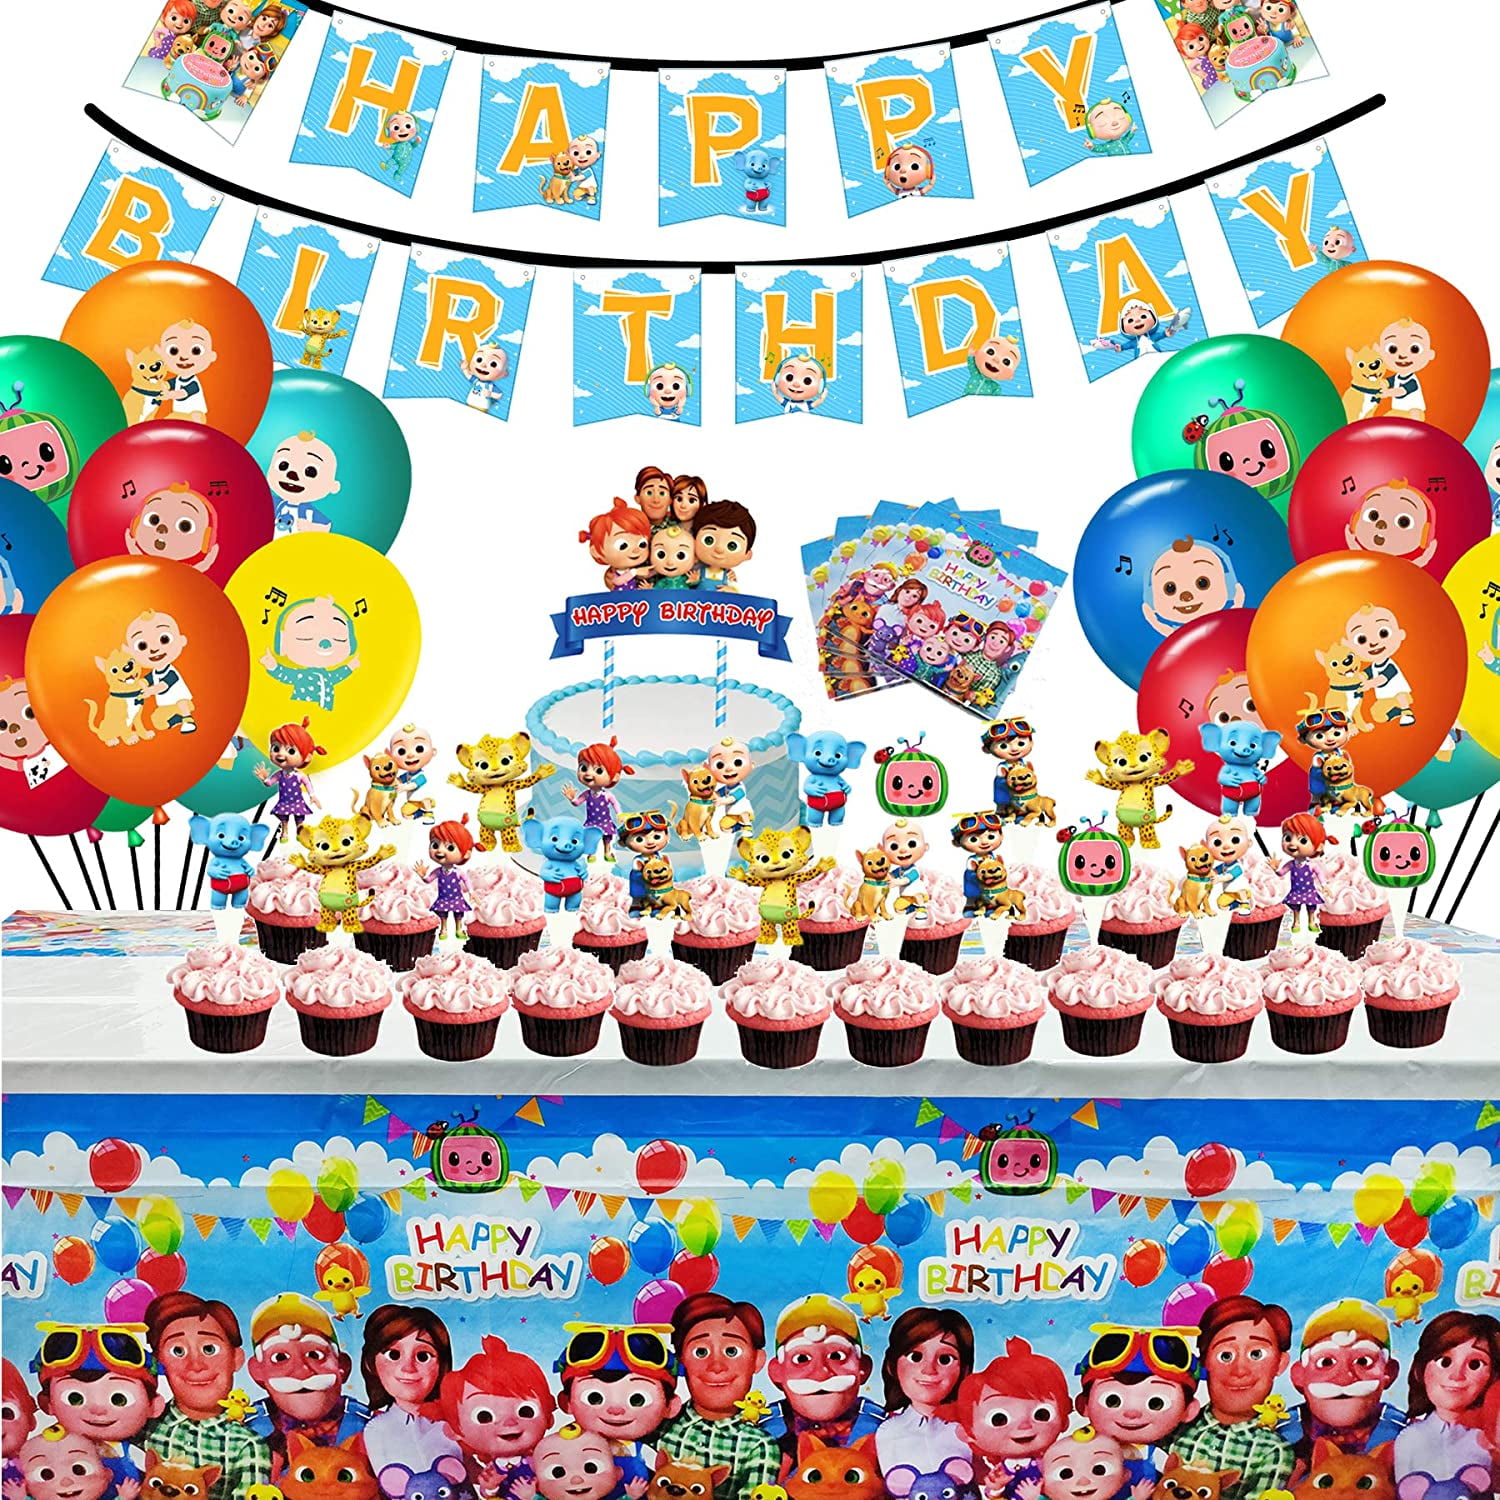 x2 Personalised Birthday Banner Princess Children Party Decoration Poster 41 